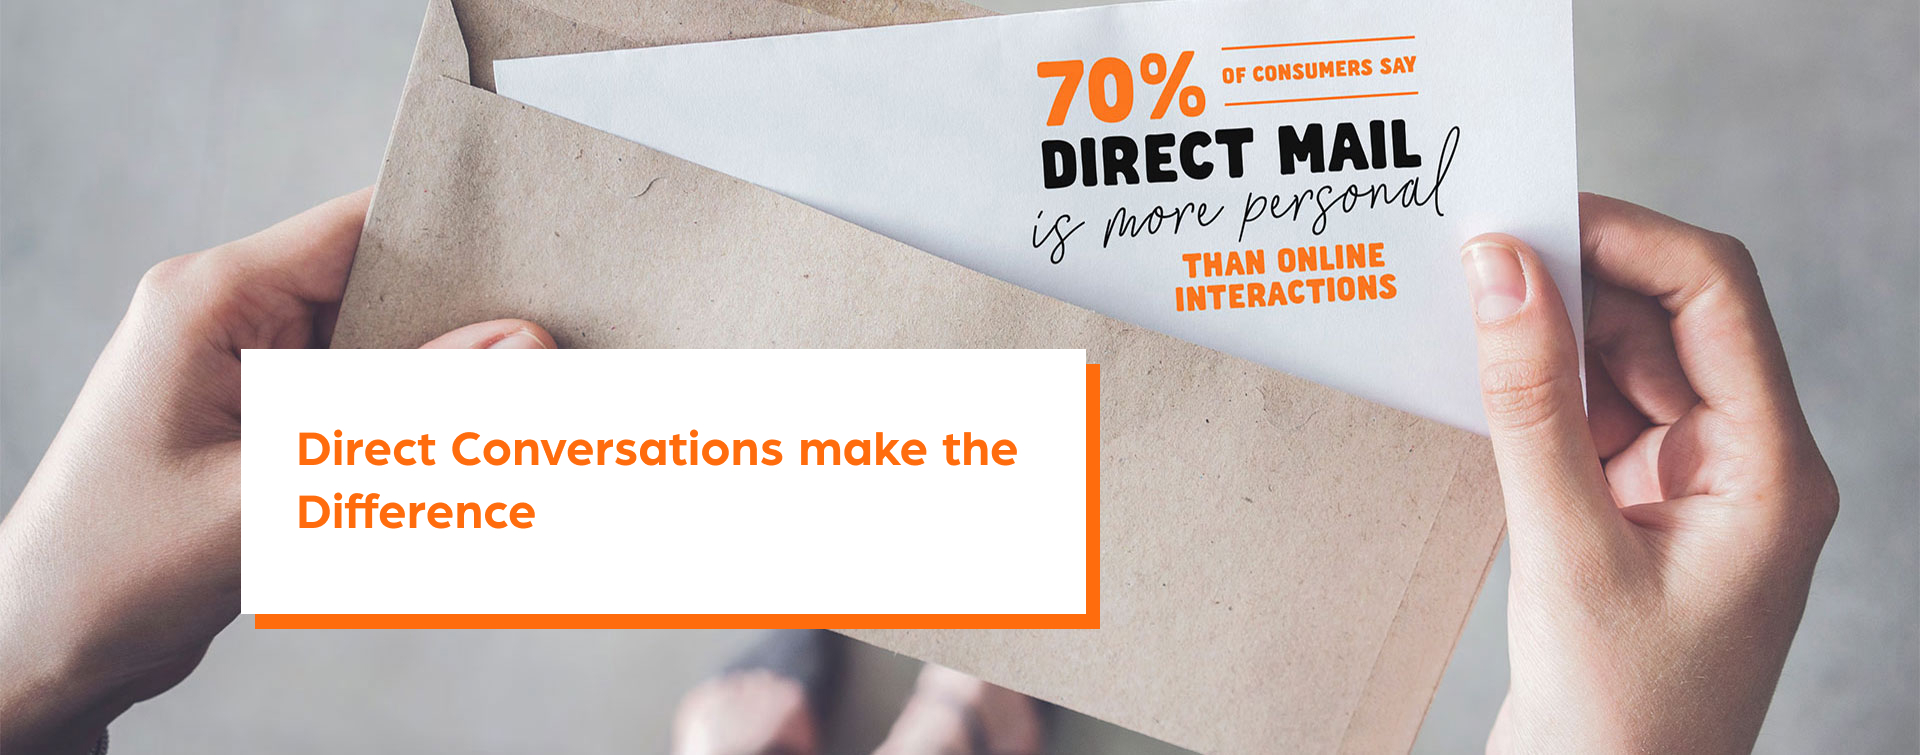 Direct mail marketing more personal than online